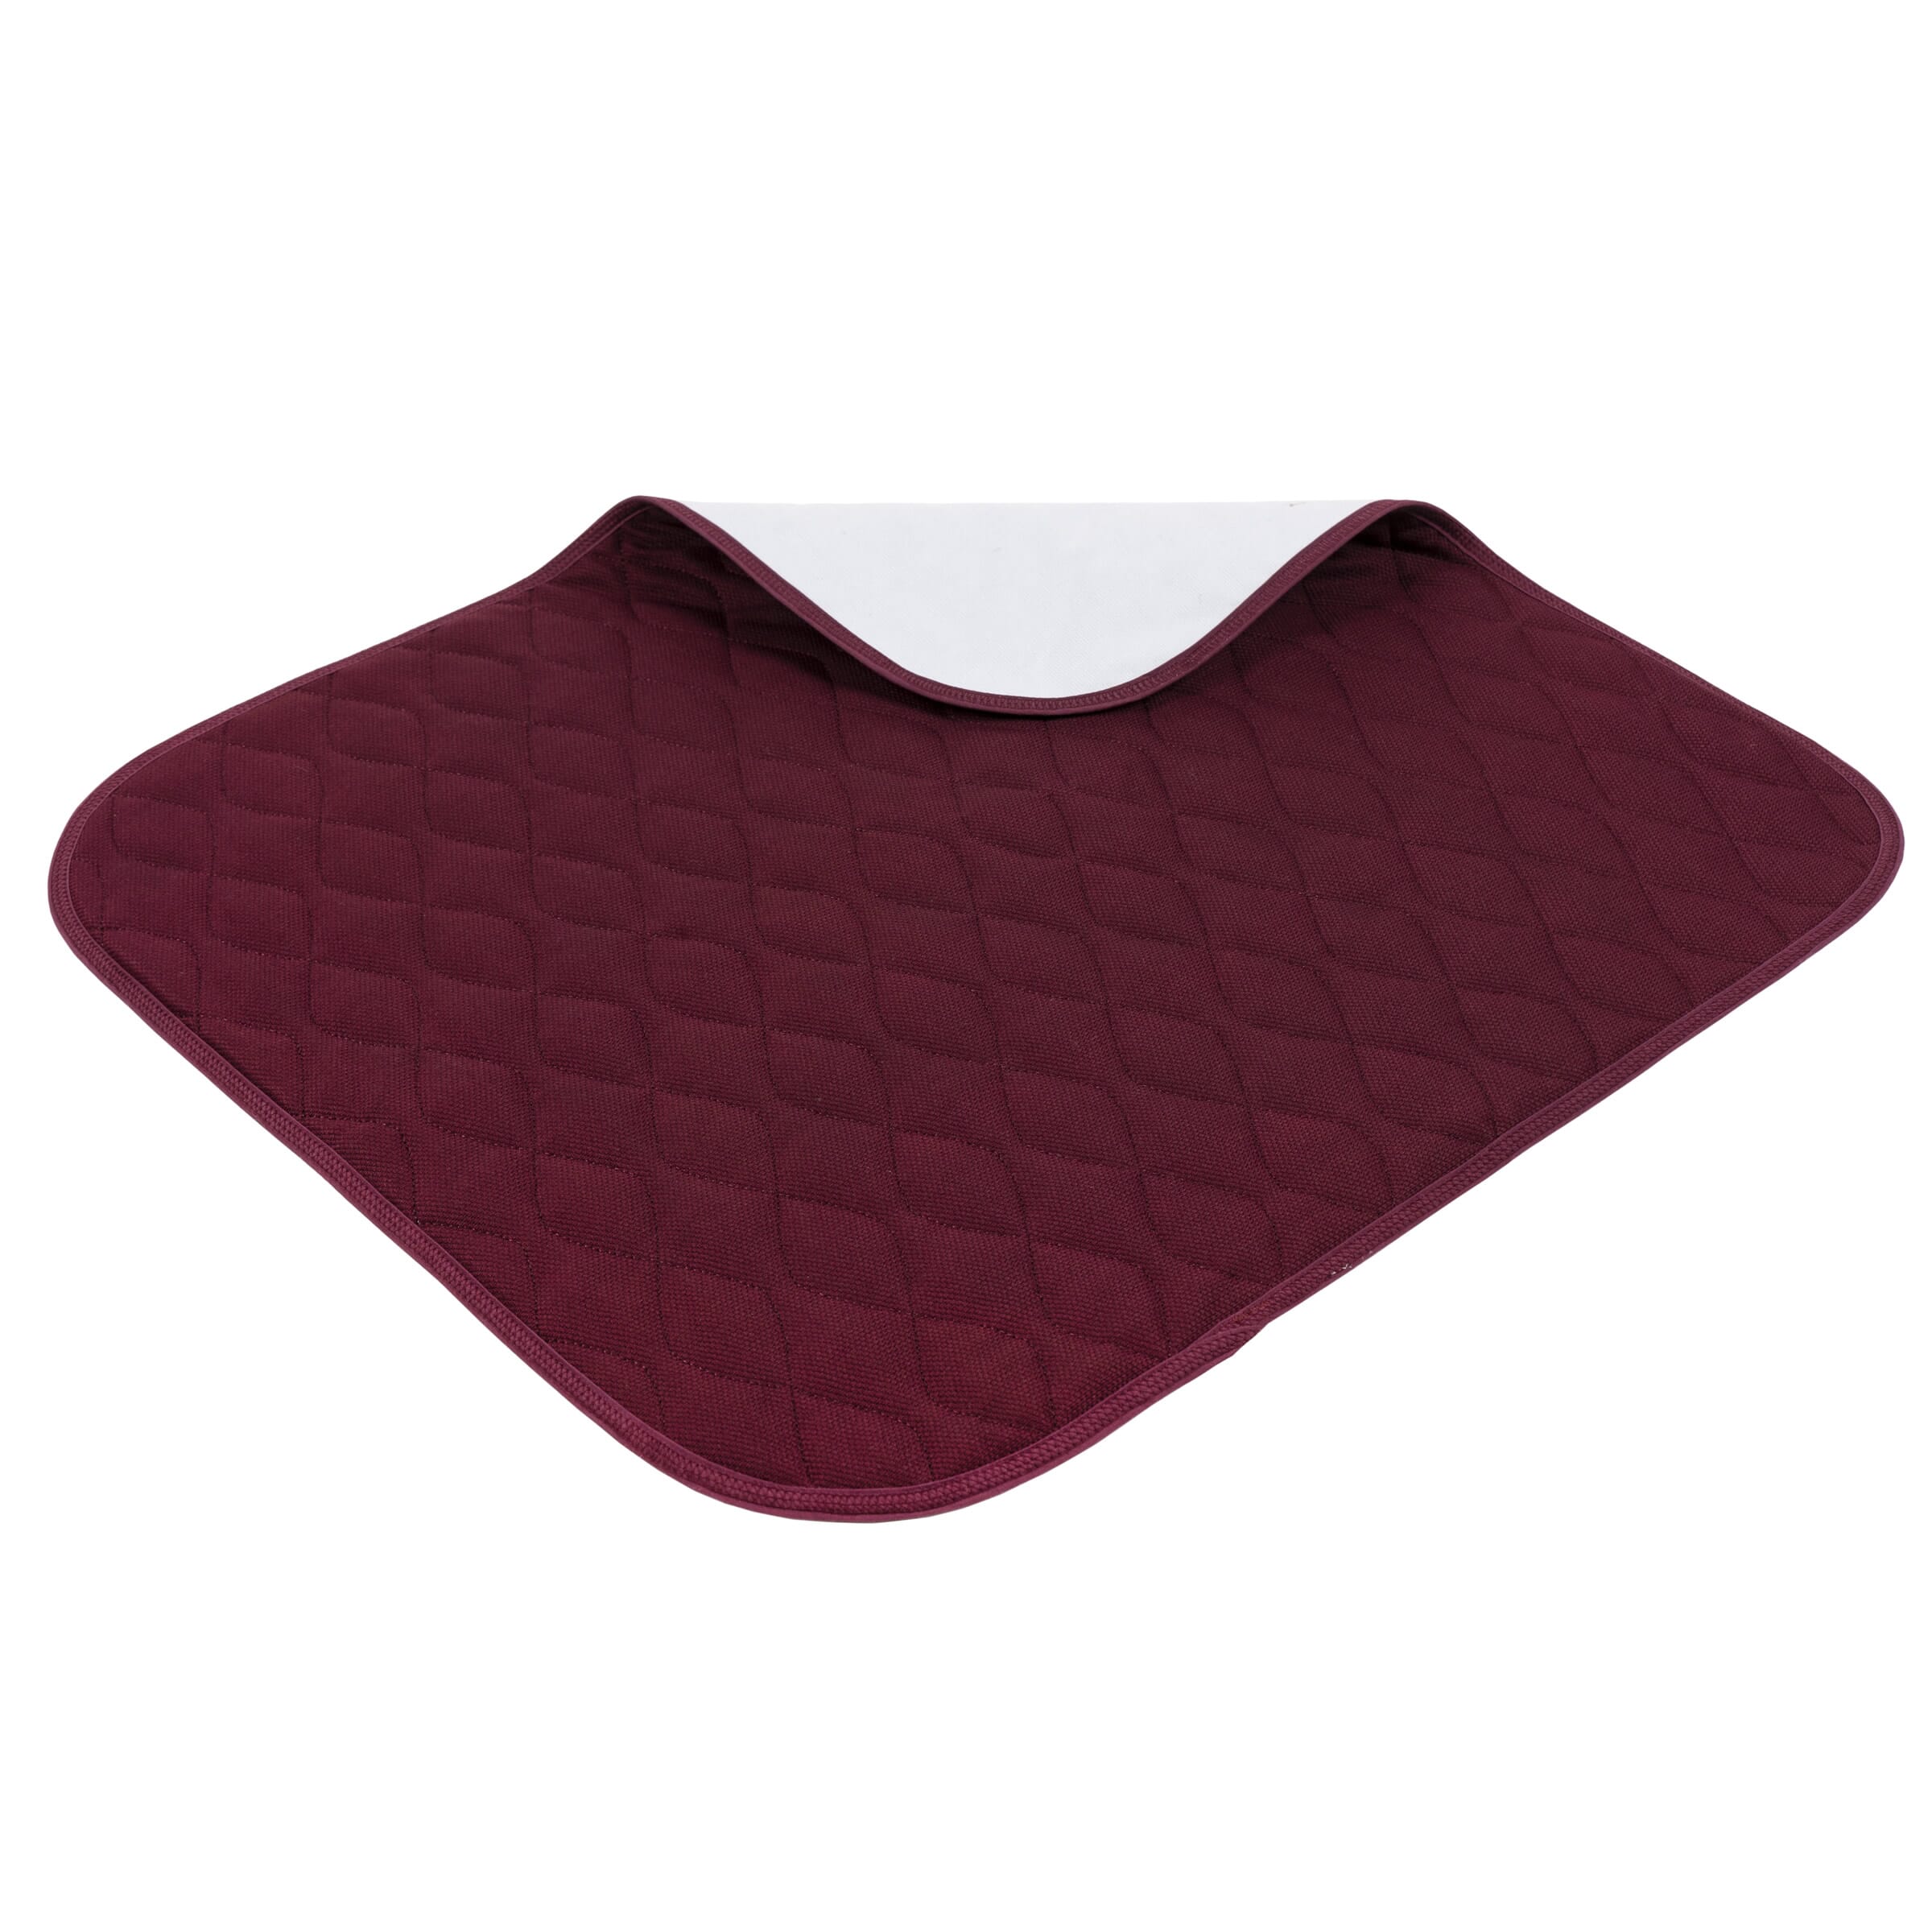 View Incontinence Chair Pads Red information